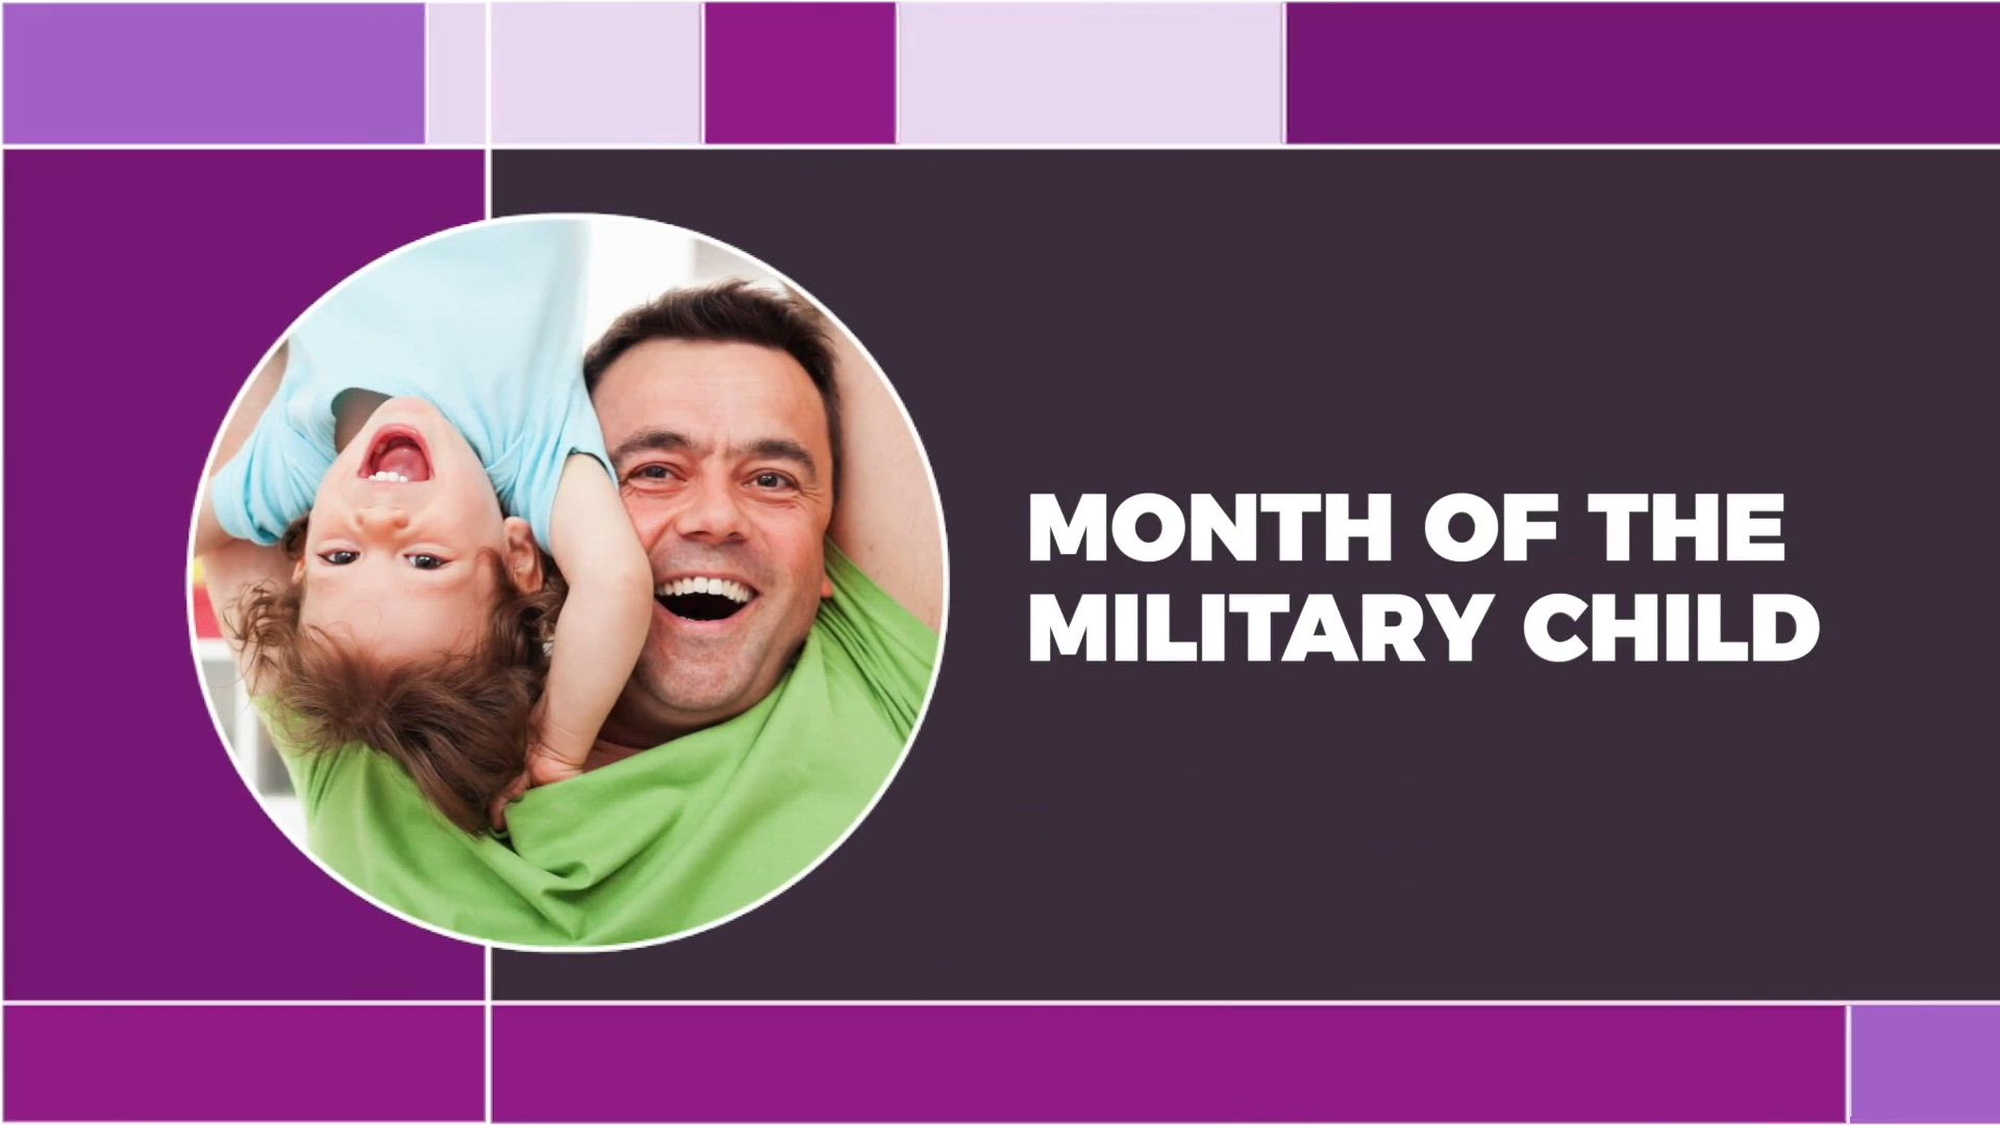 April is the Month of the Military Child. Show your support by wearing purple throughout the month!